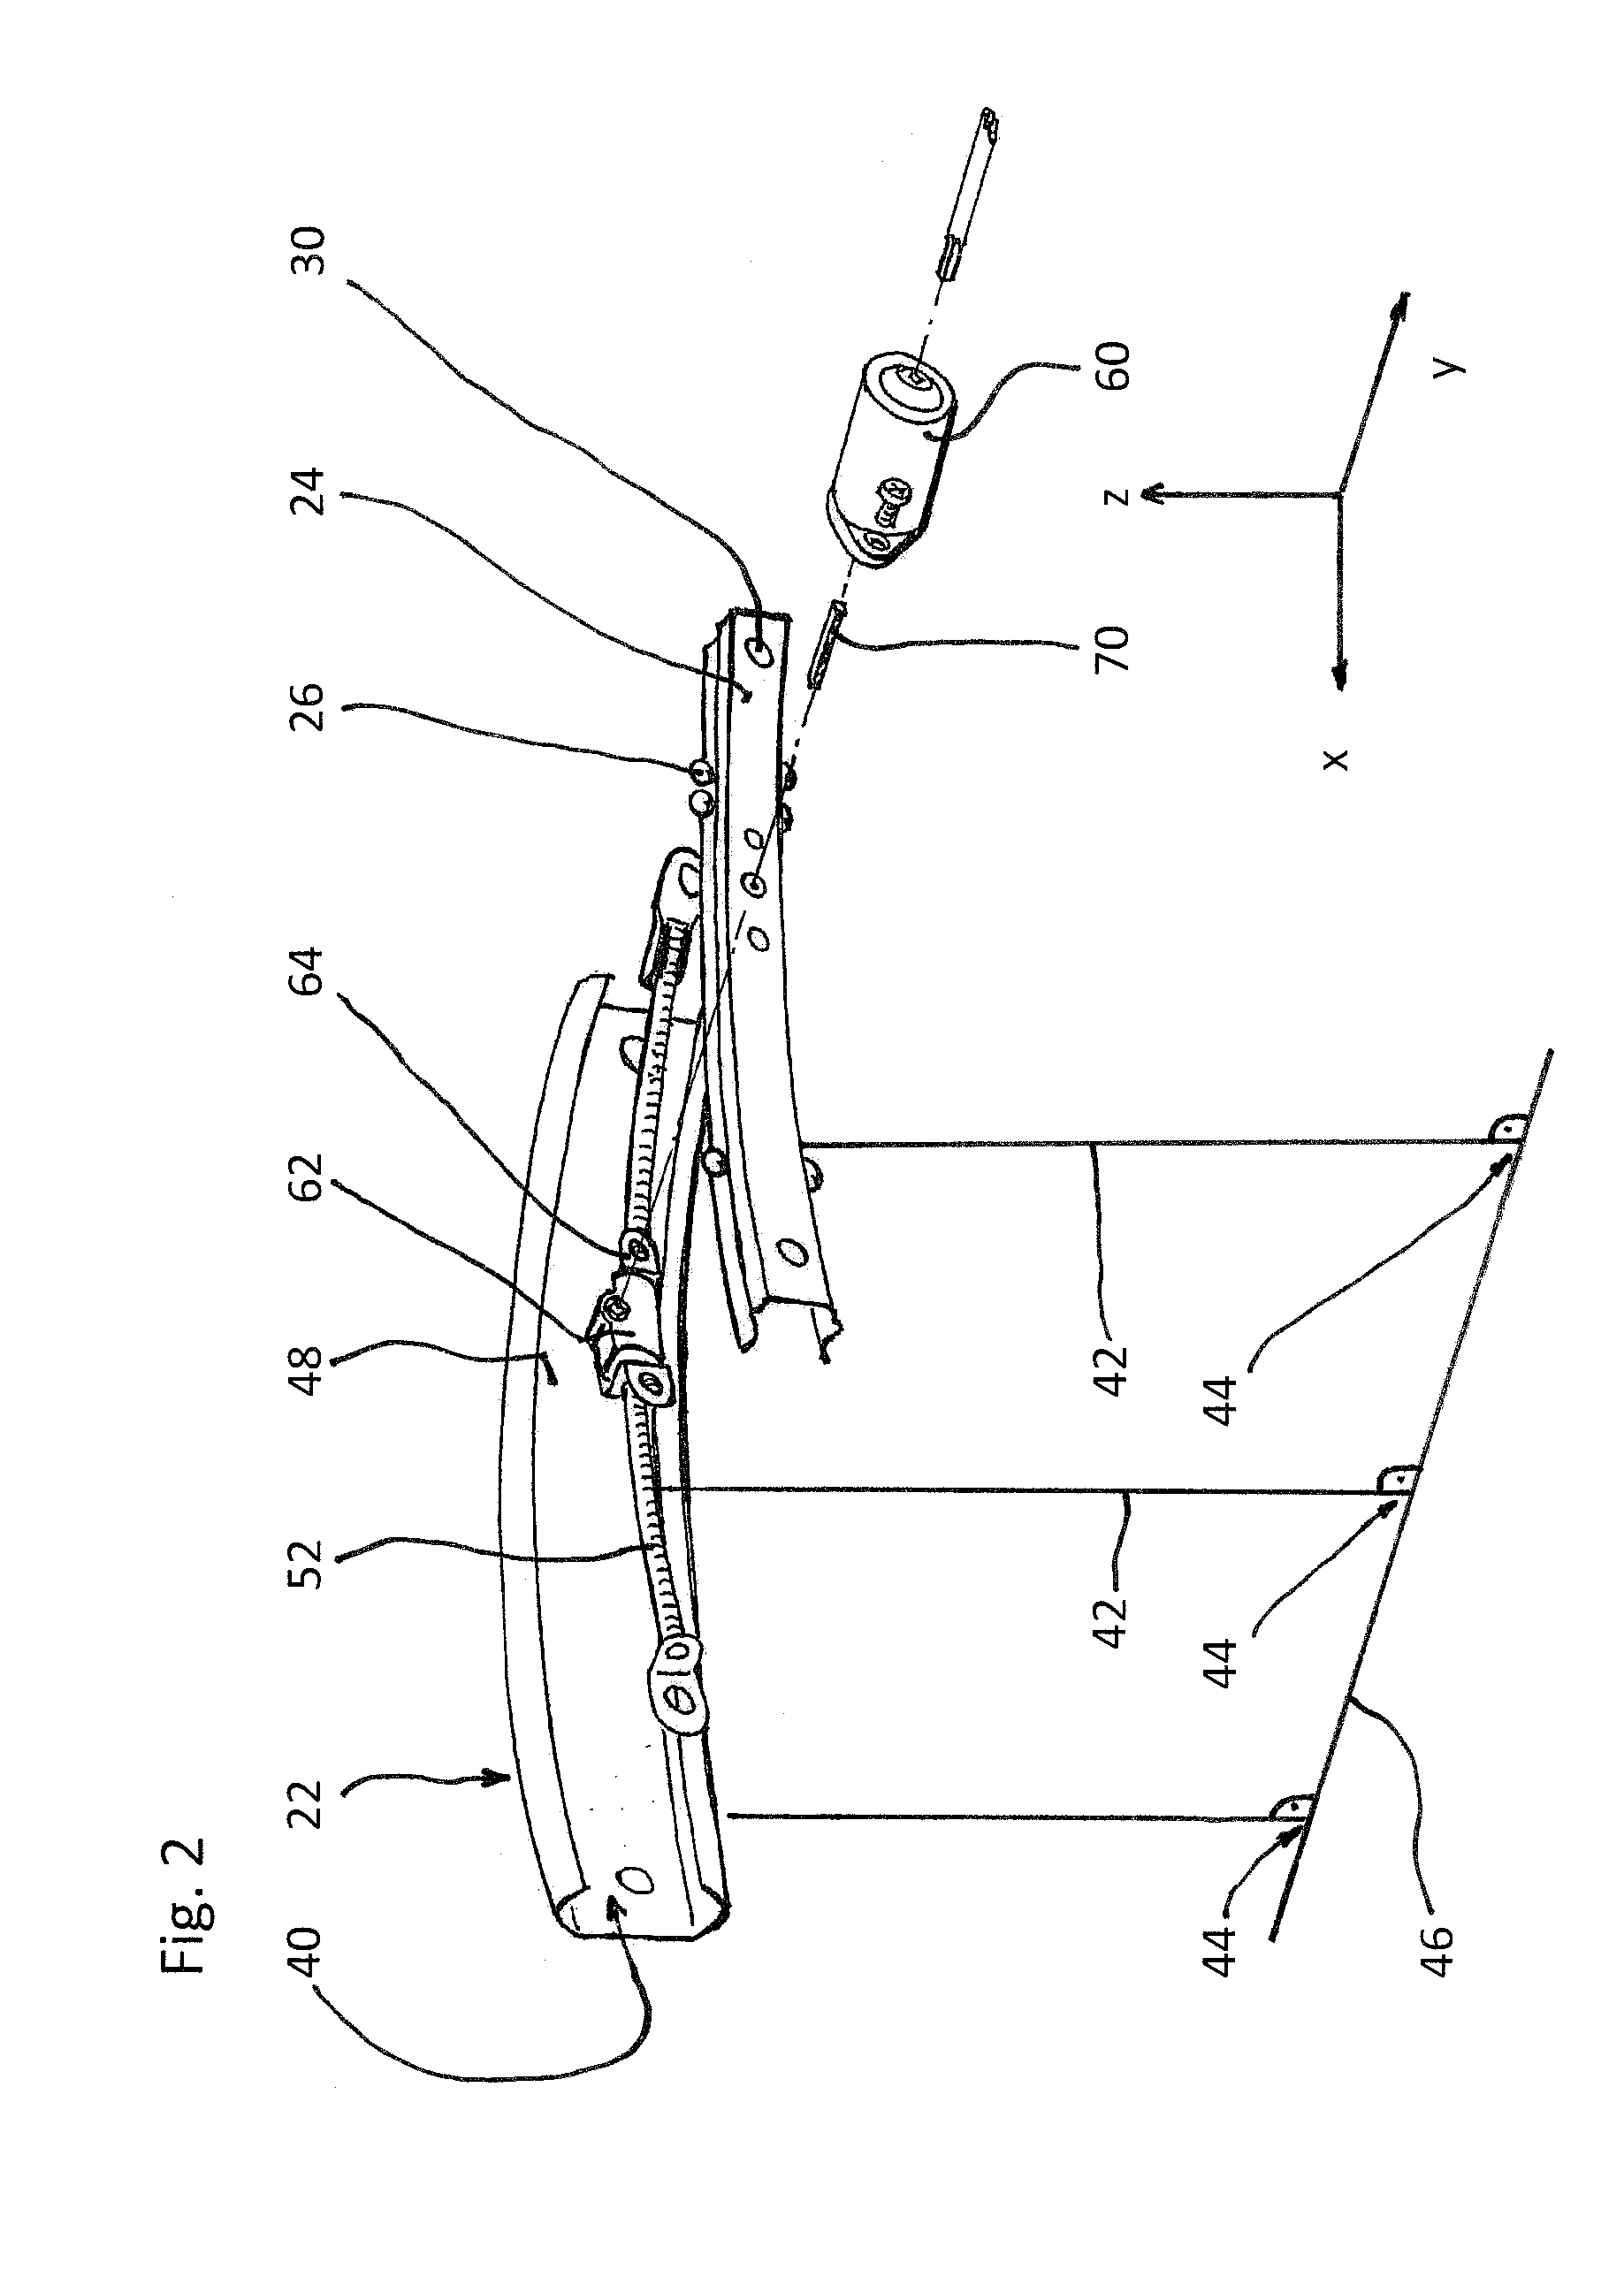 Rail guide for a longitudinal adjustment of a motor vehicle seat and method for producing such a rail guide